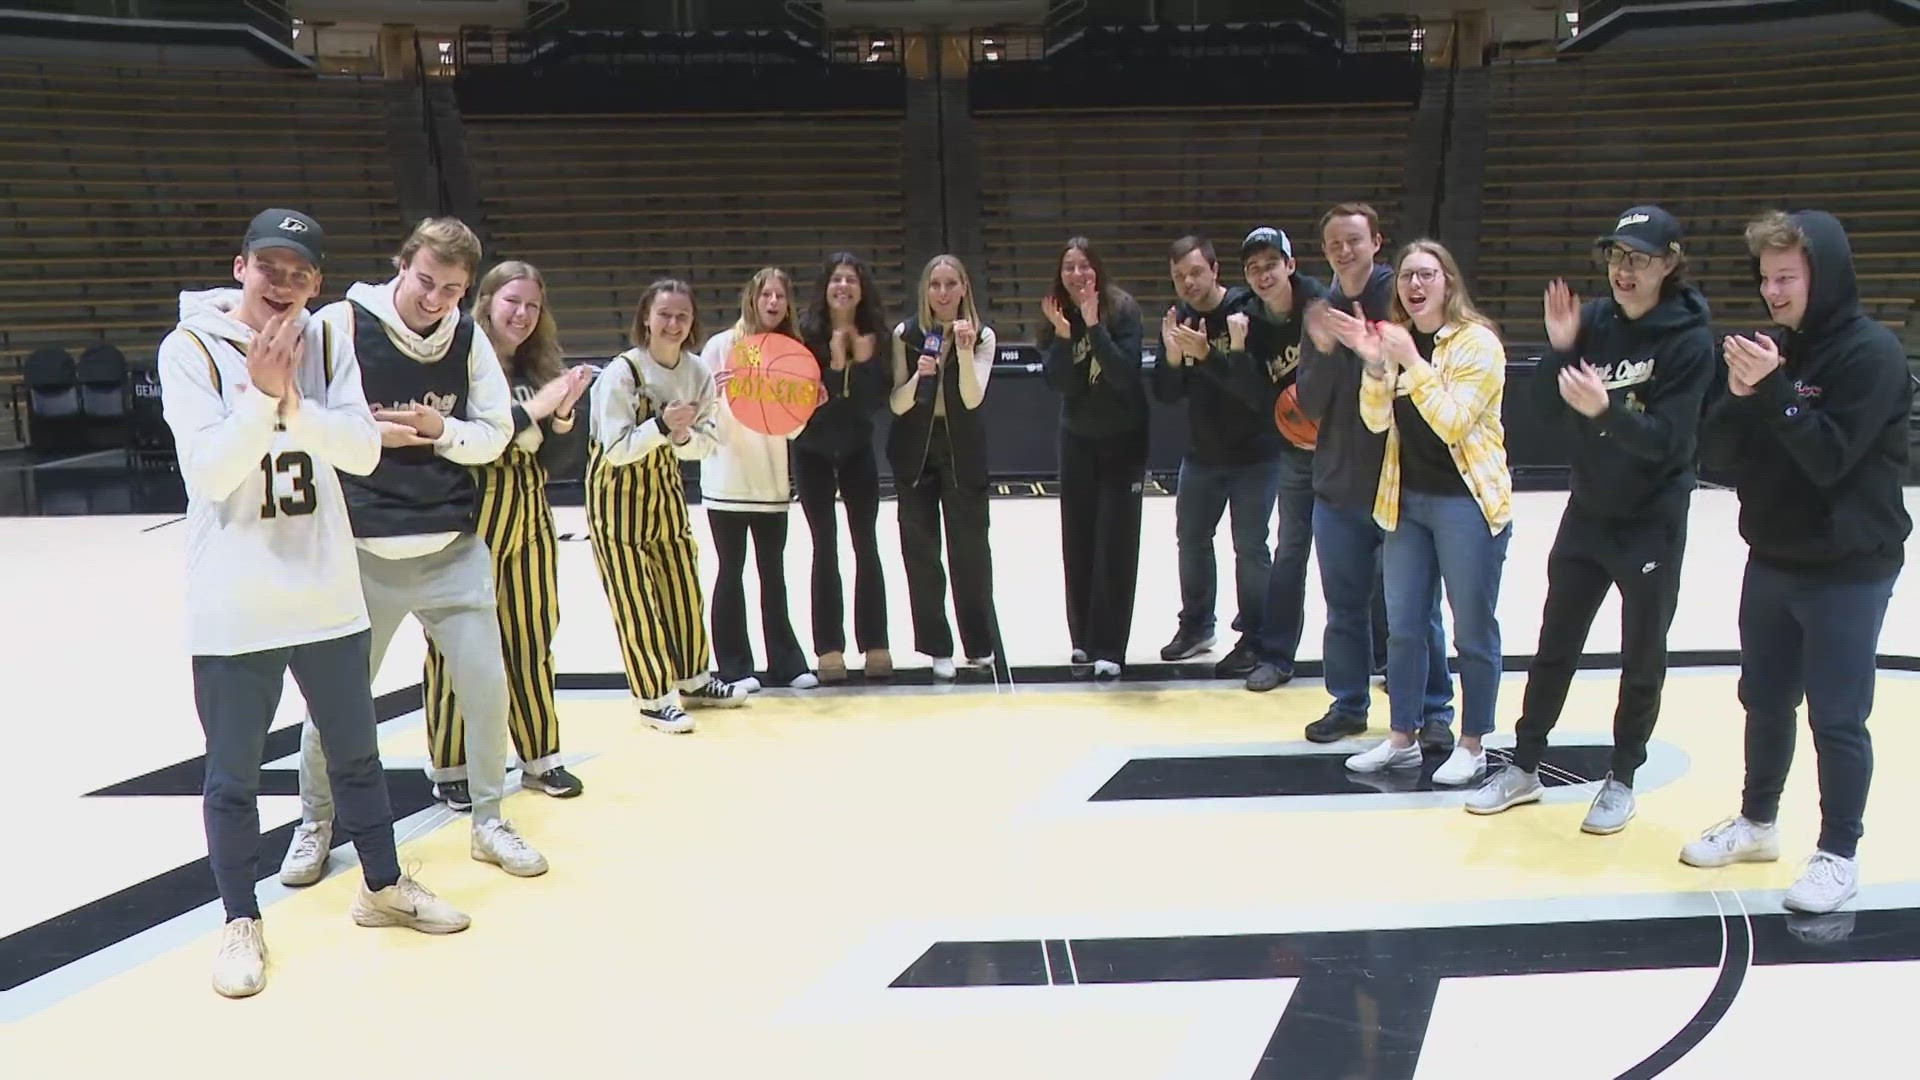 Students are Purdue's campus are excited and ready for the Boilers final four matchup against NC State.